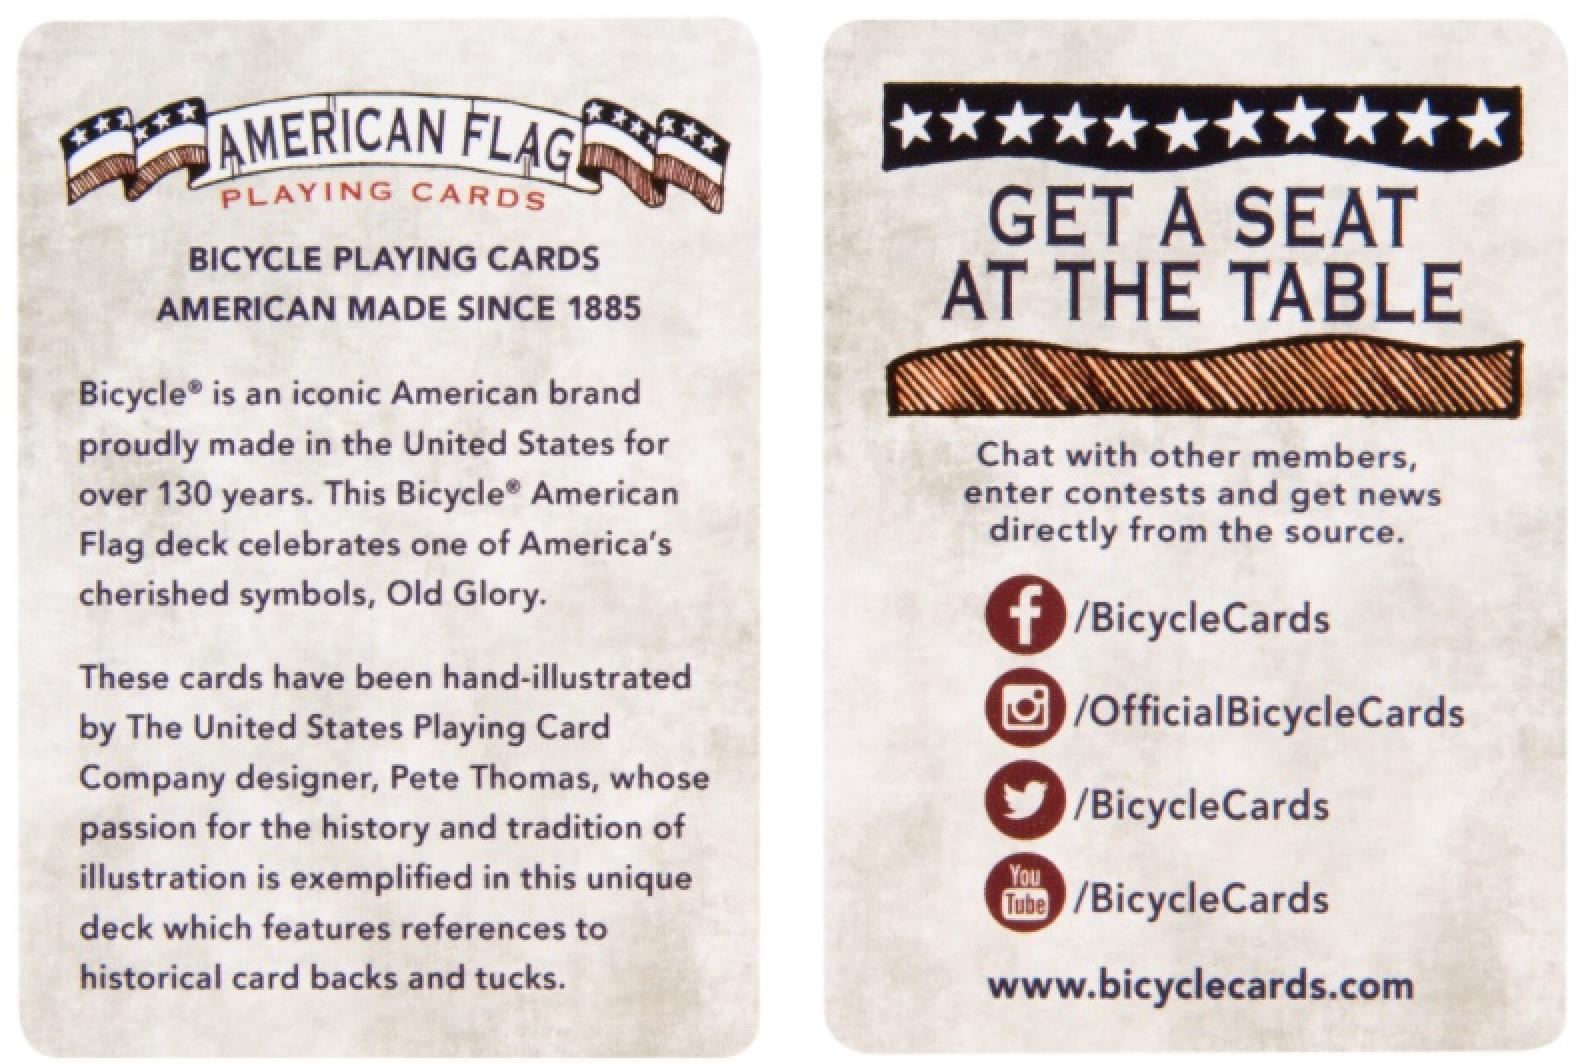 Bicycle American Flag Playing Cards Info